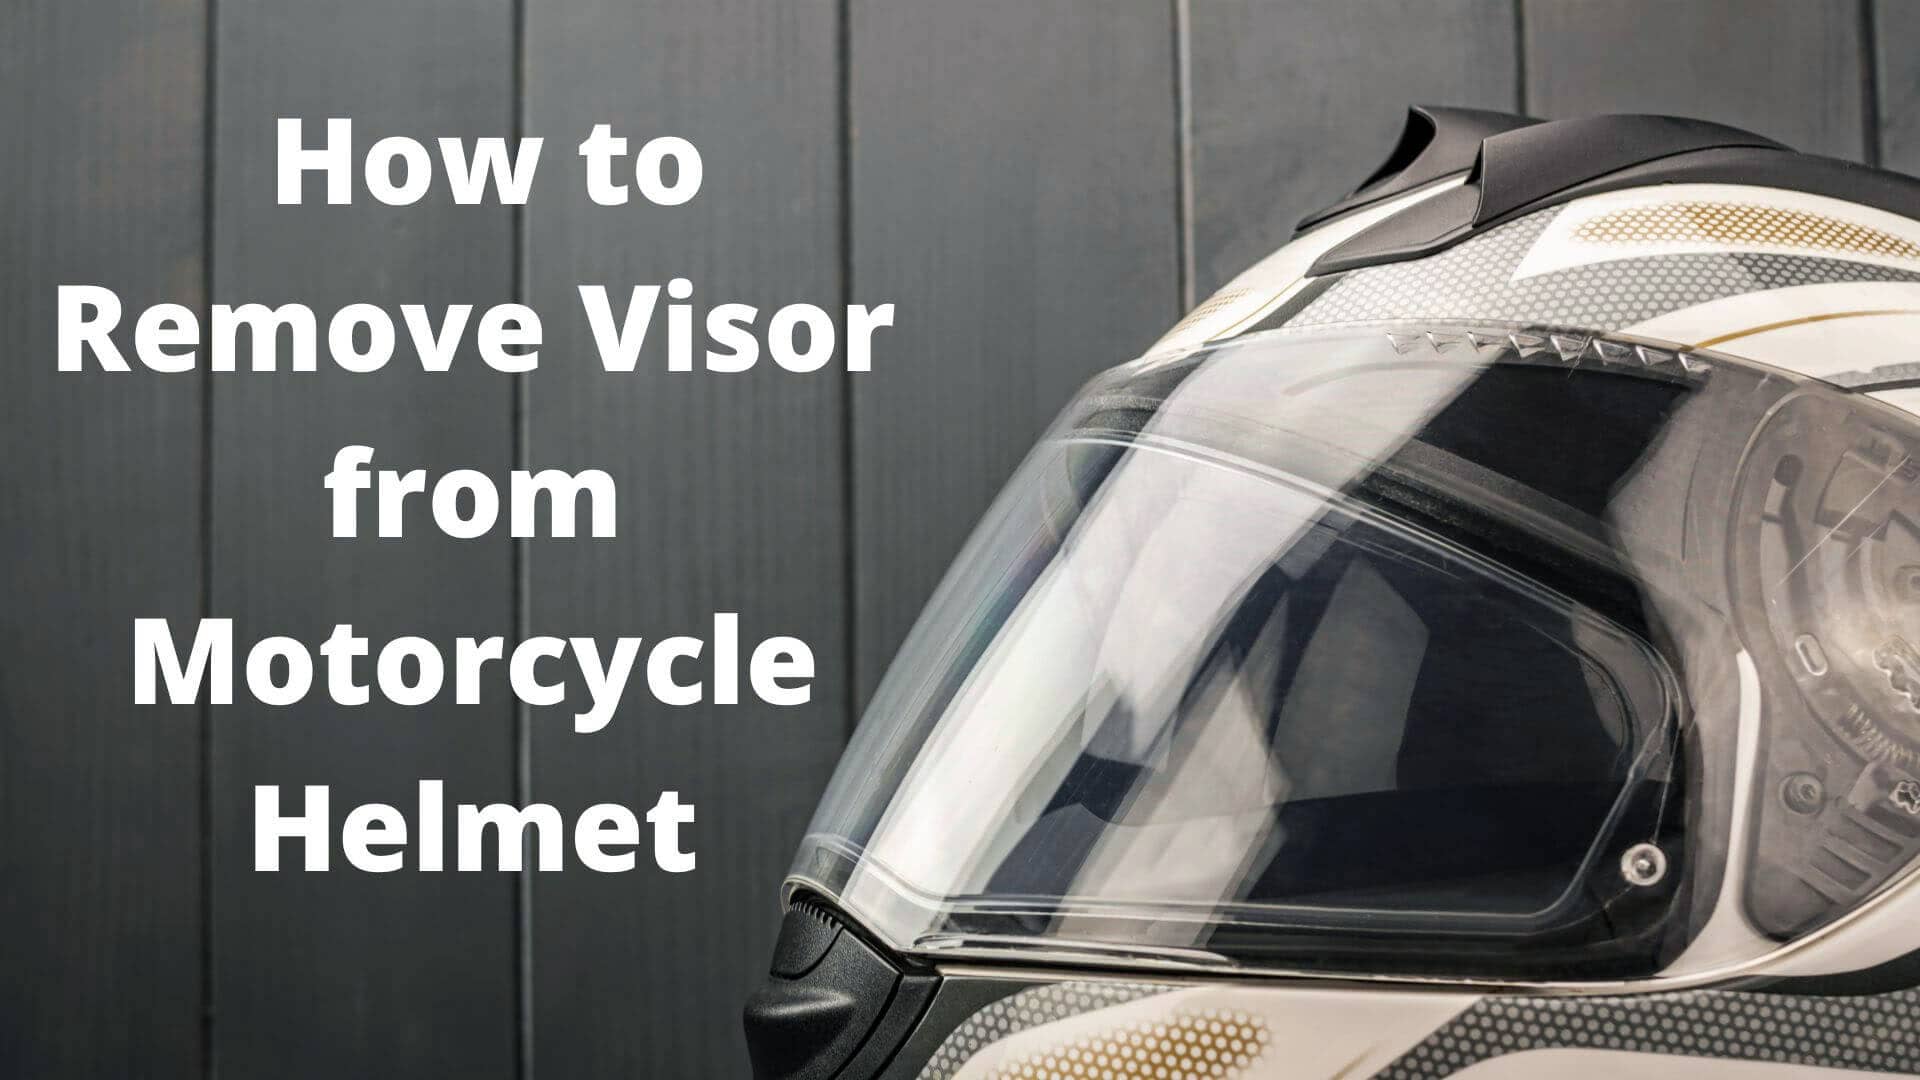 How to Remove Visor from Motorcycle Helmet